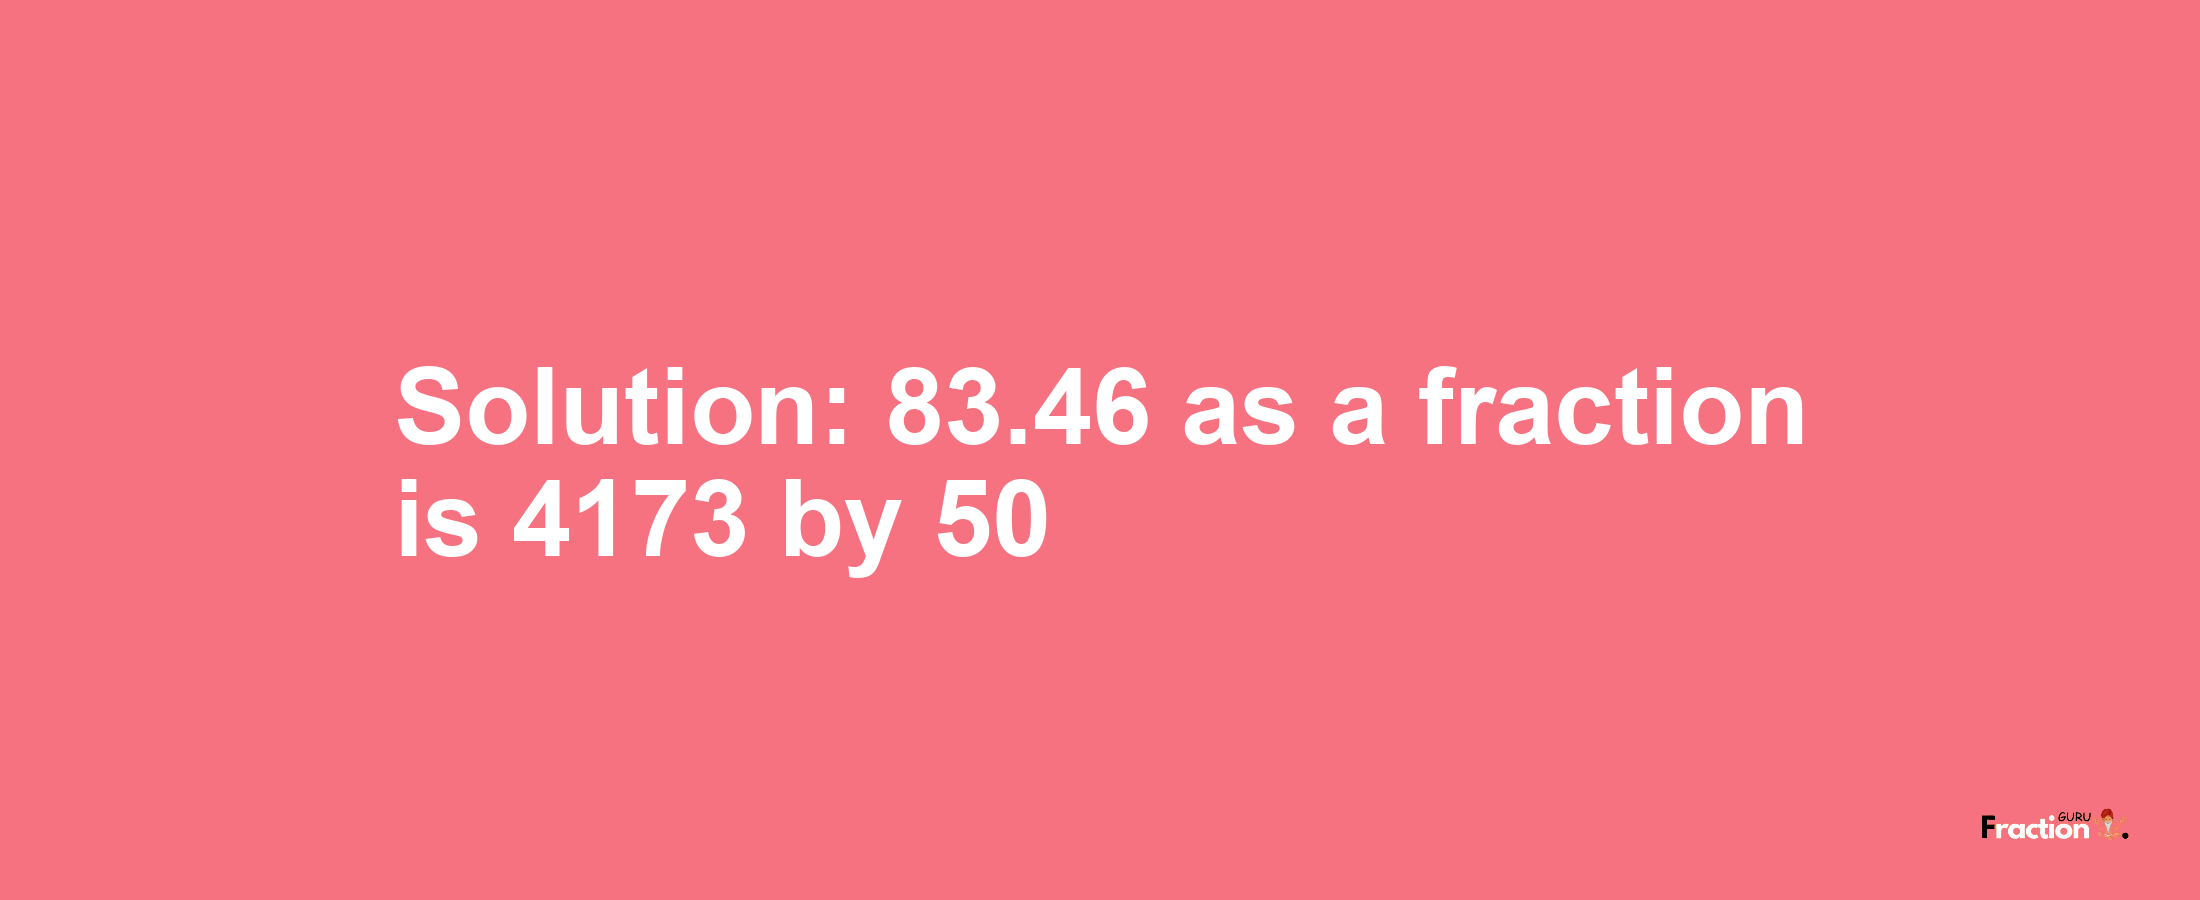 Solution:83.46 as a fraction is 4173/50